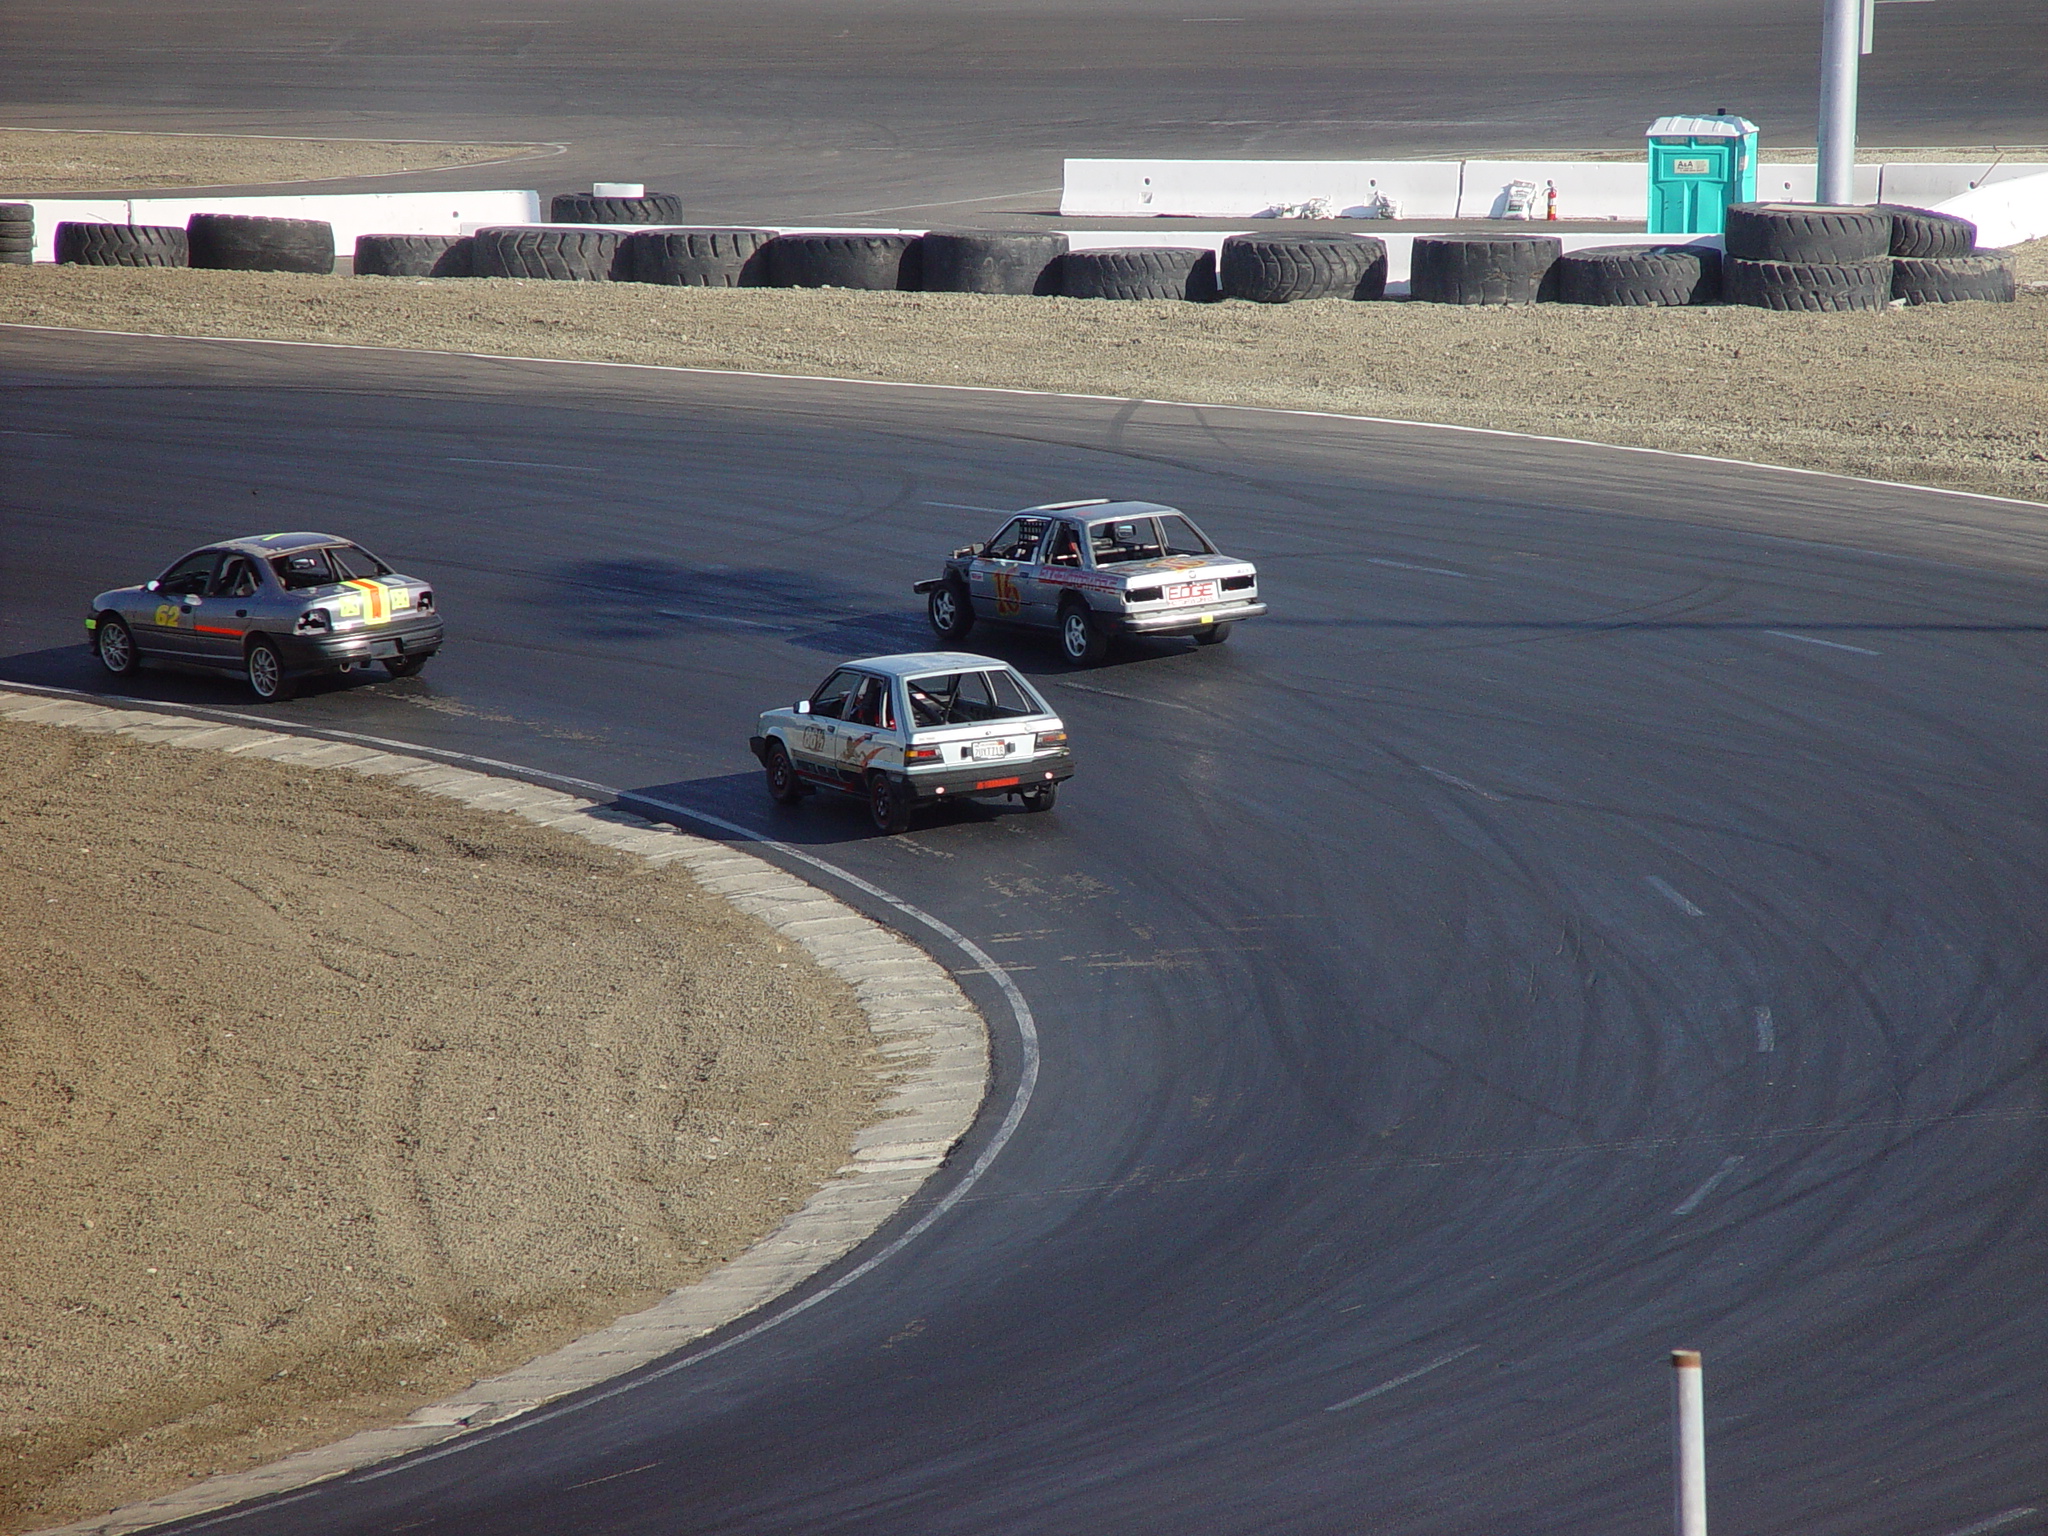 four police cars drive around the bend during a race